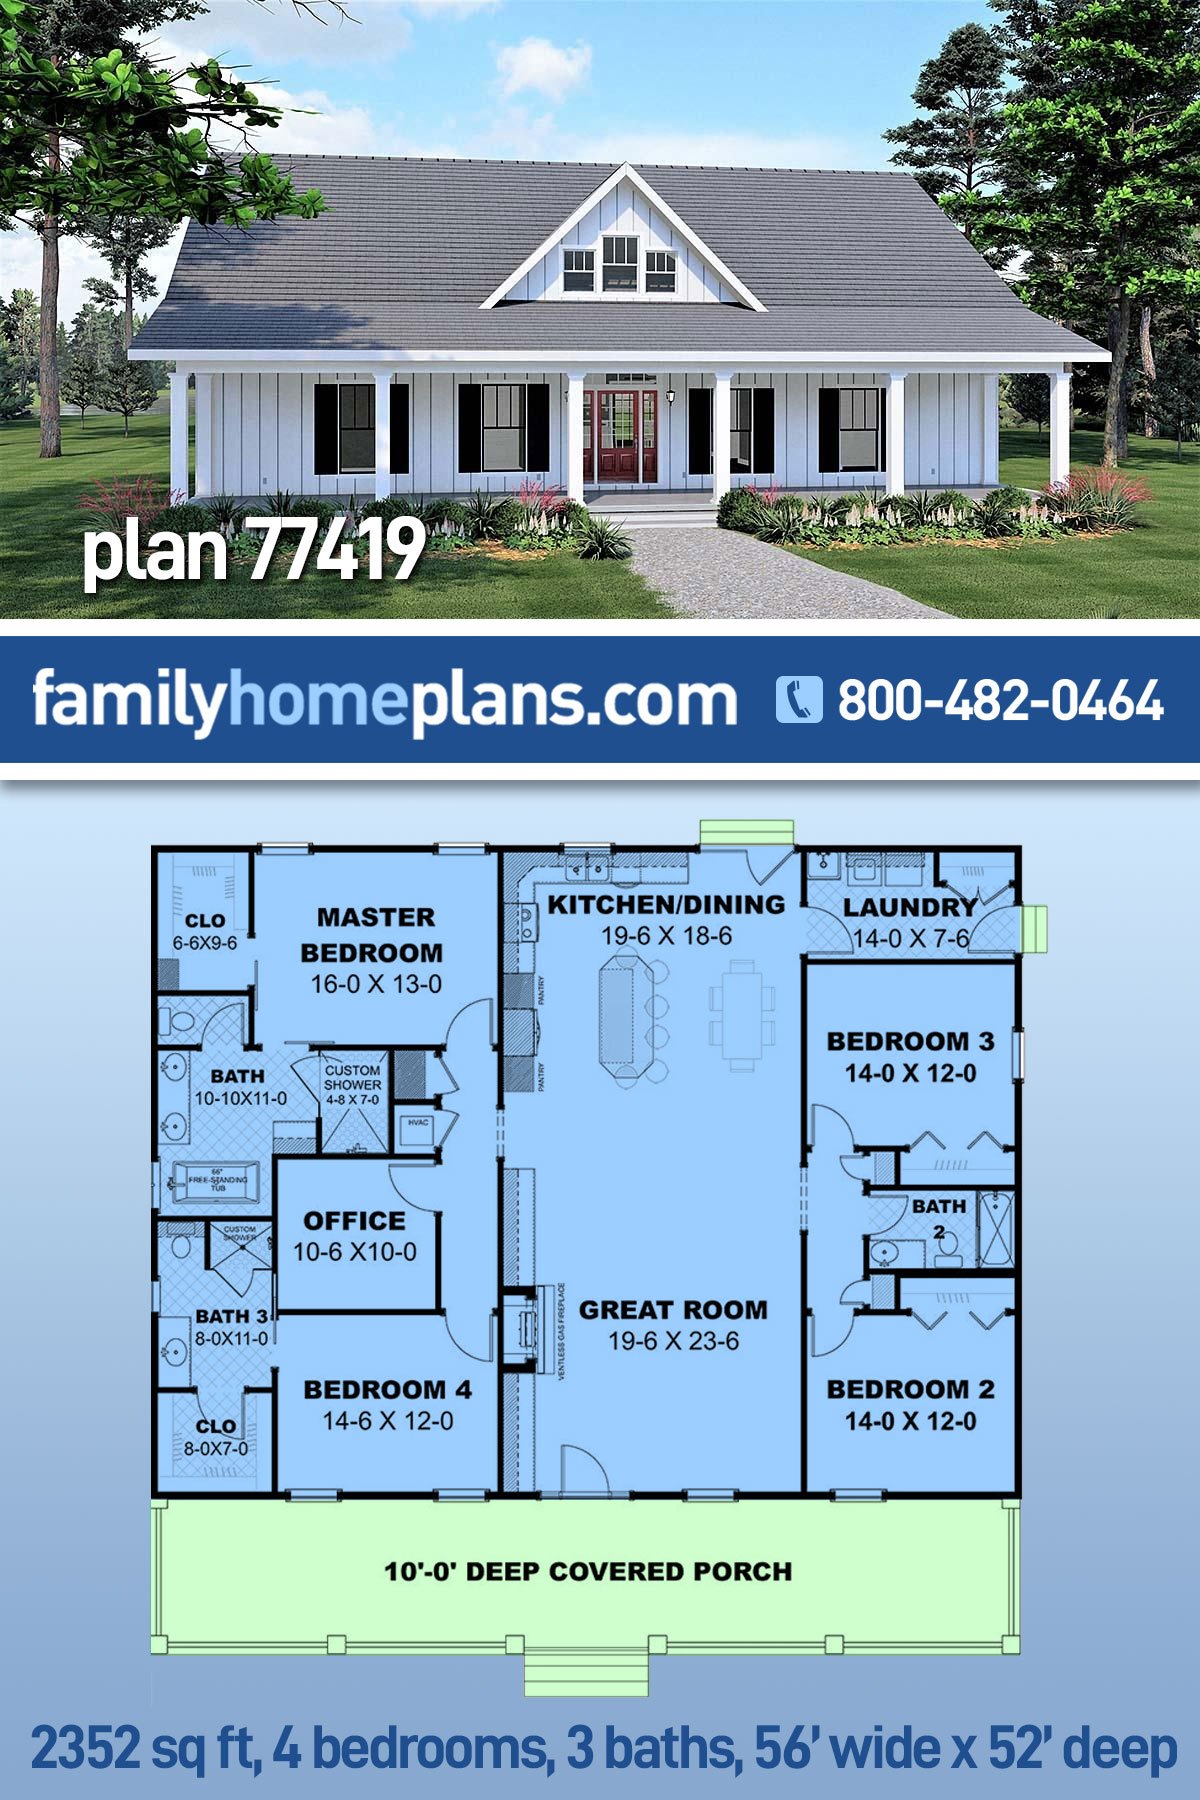 Modern Southwest Bliss House Plan - 1 Stories, 3 Bedrooms, 2.1 Baths, 1,744 Sq Feet for Sale